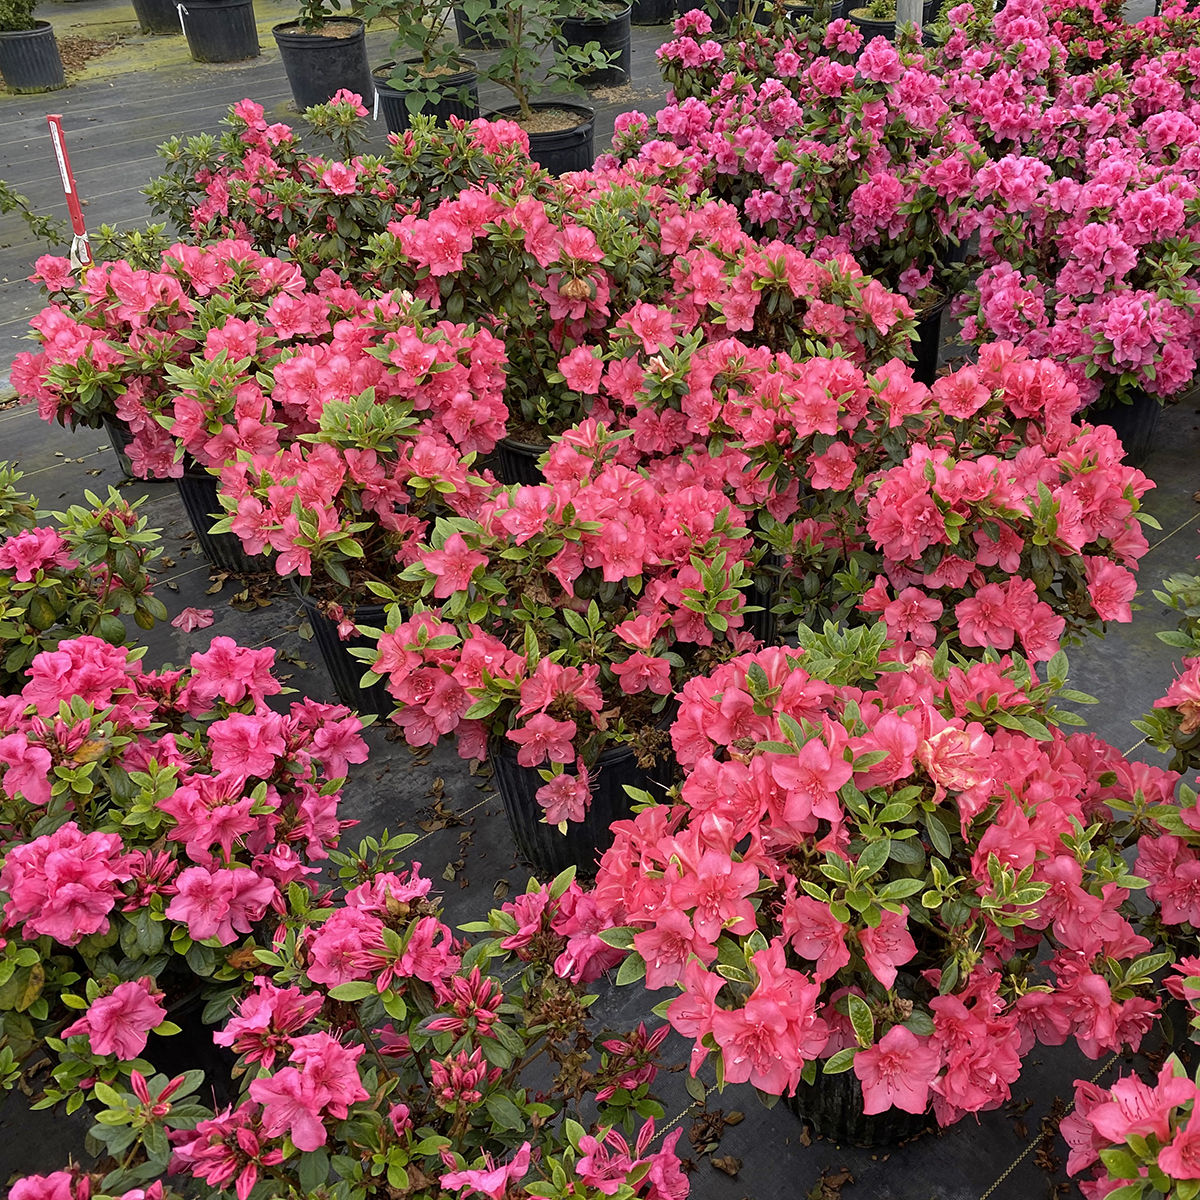 Perfecto Mundo Epic Coral azalea plants growing in a greenhouse, covered in large coral-pink flowers.